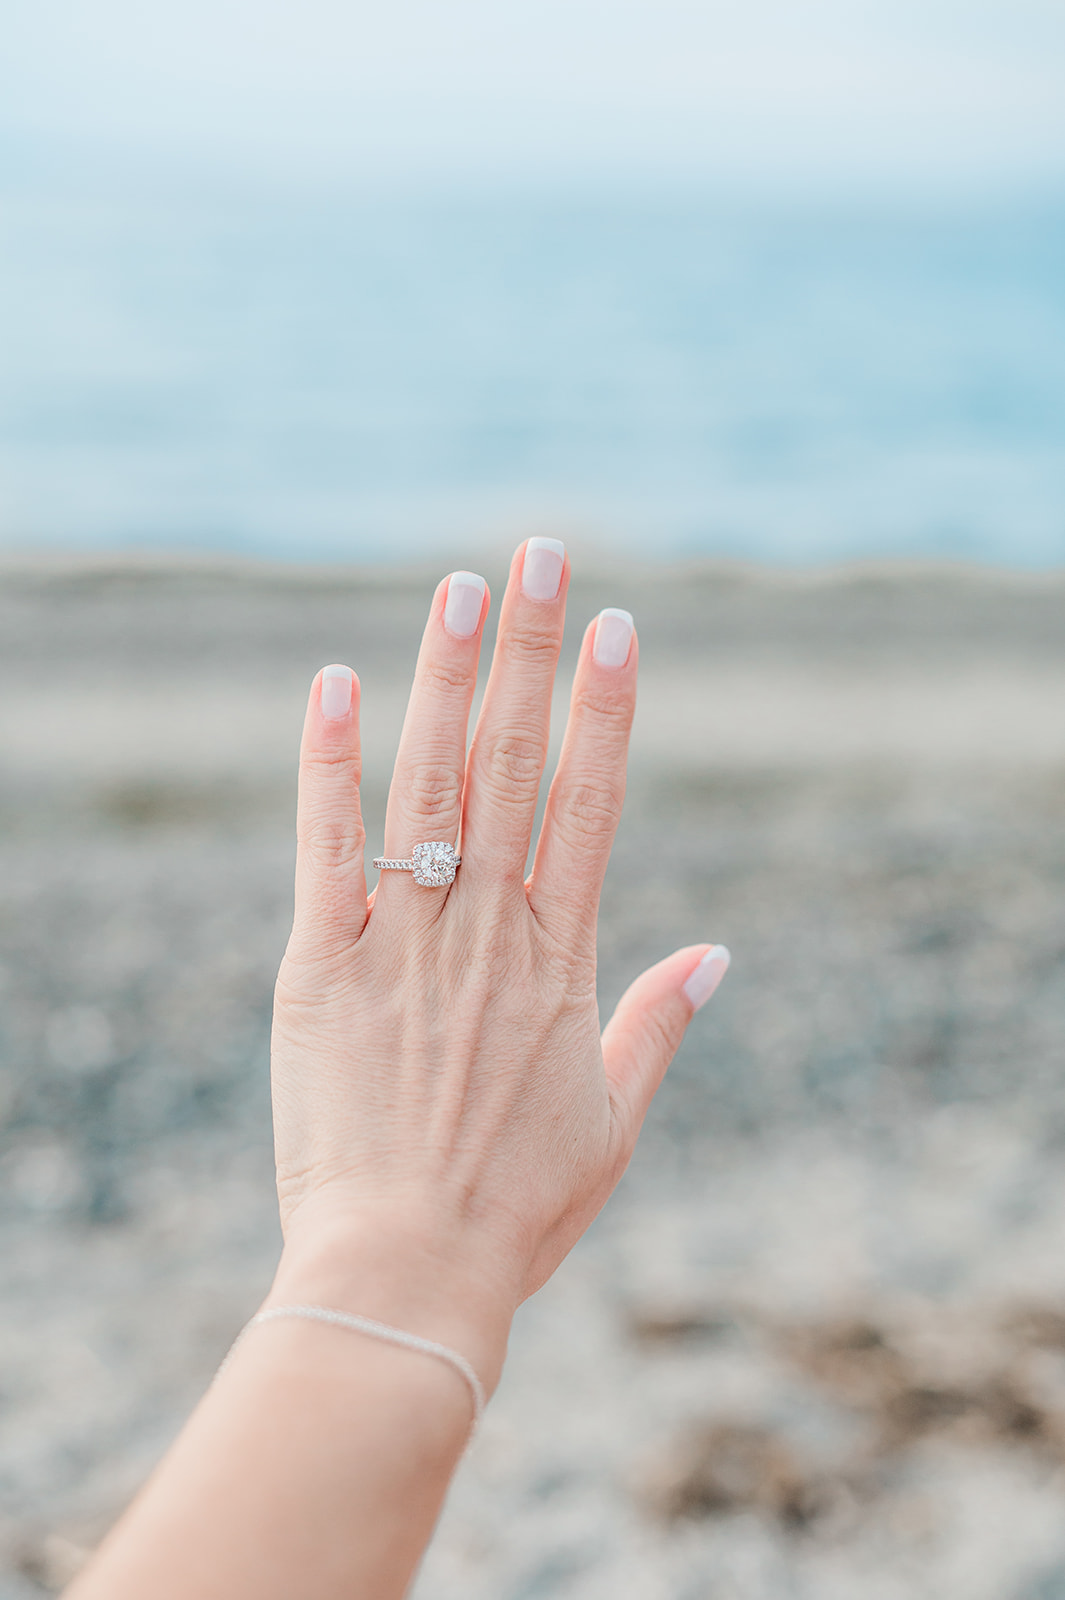 Halo engagement ring in front of coastline